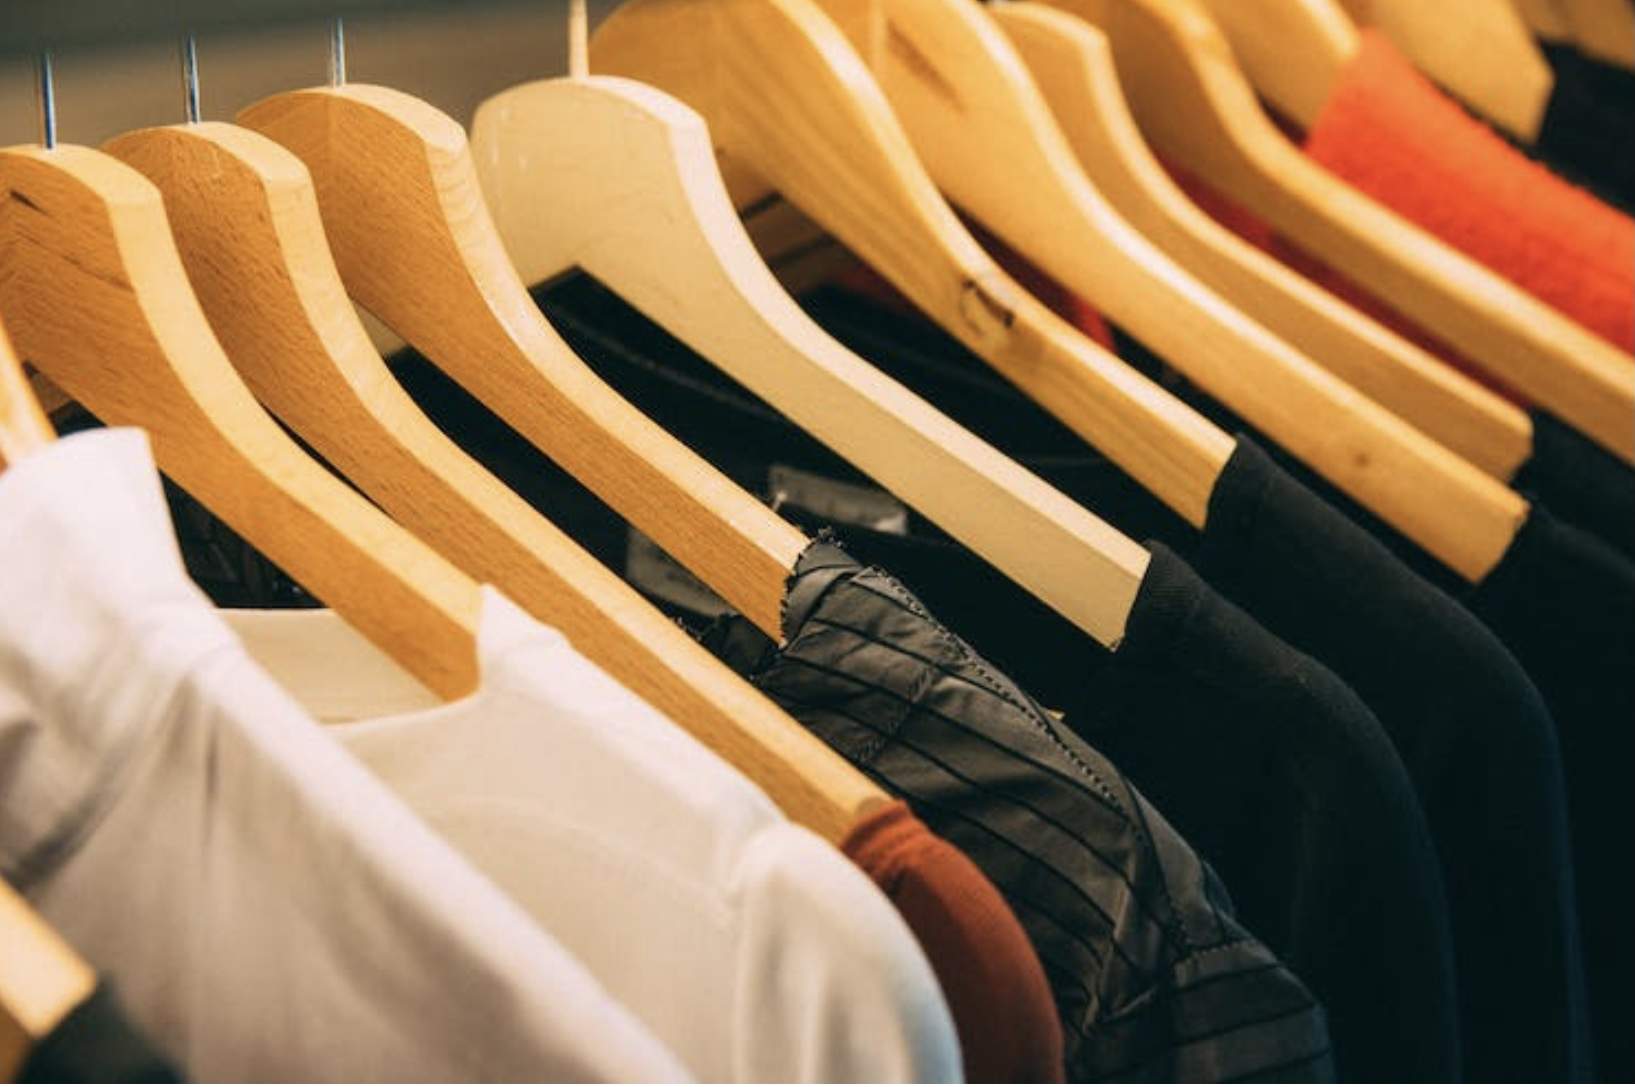 Various shirts on wooden hangers.